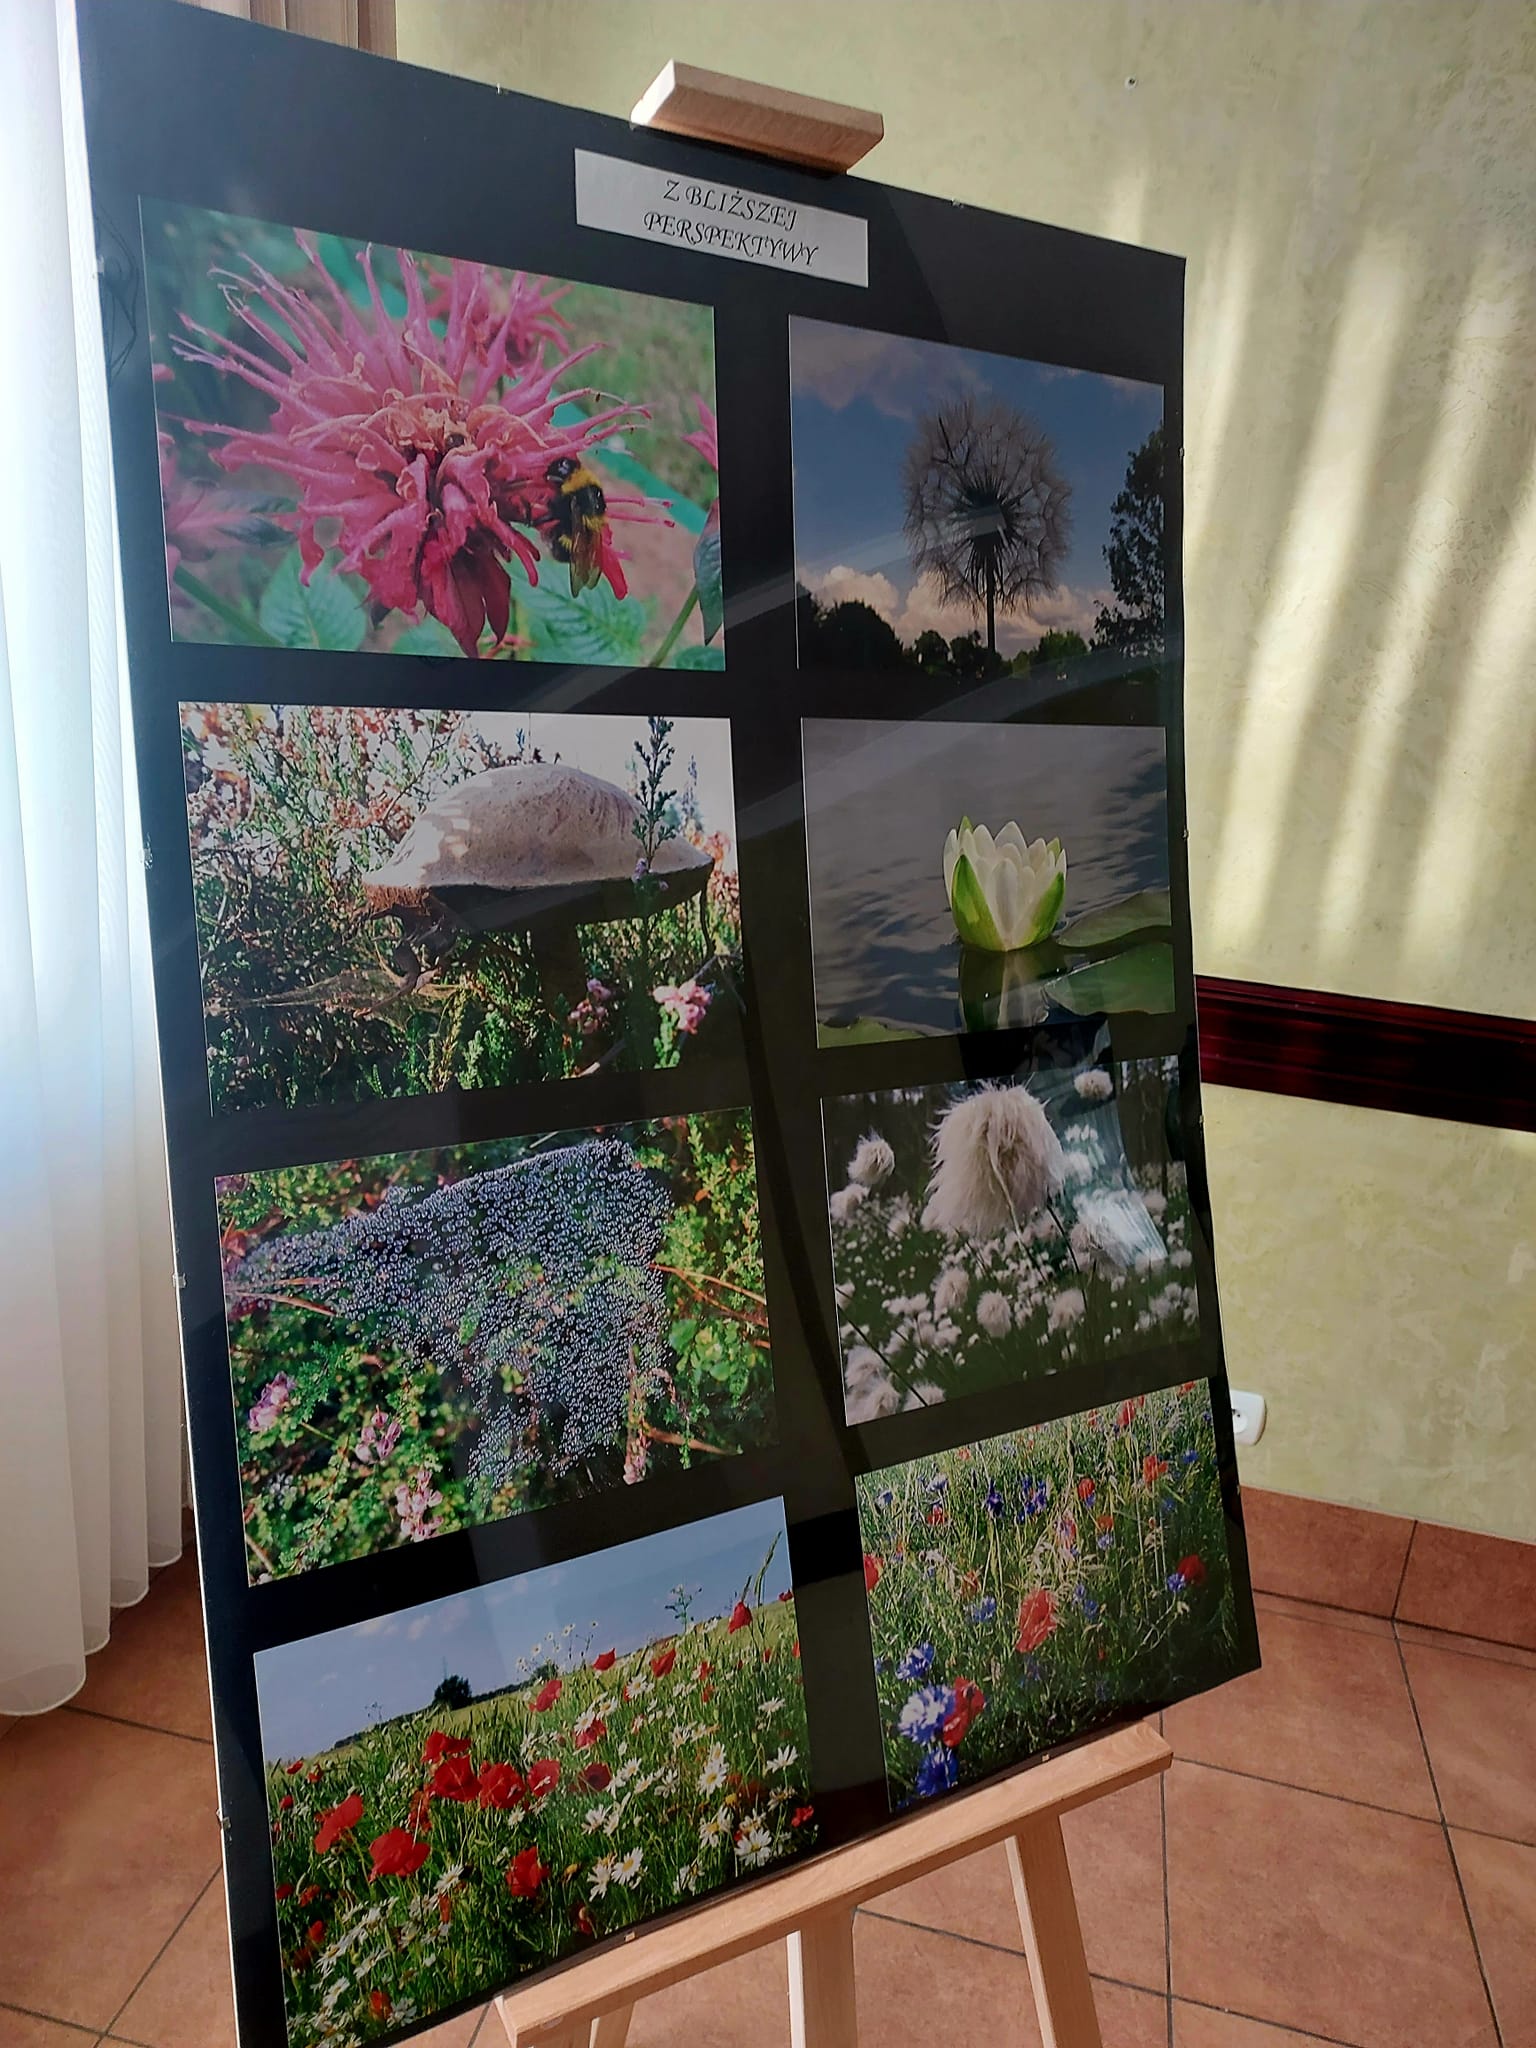 Presentation of photos from the series